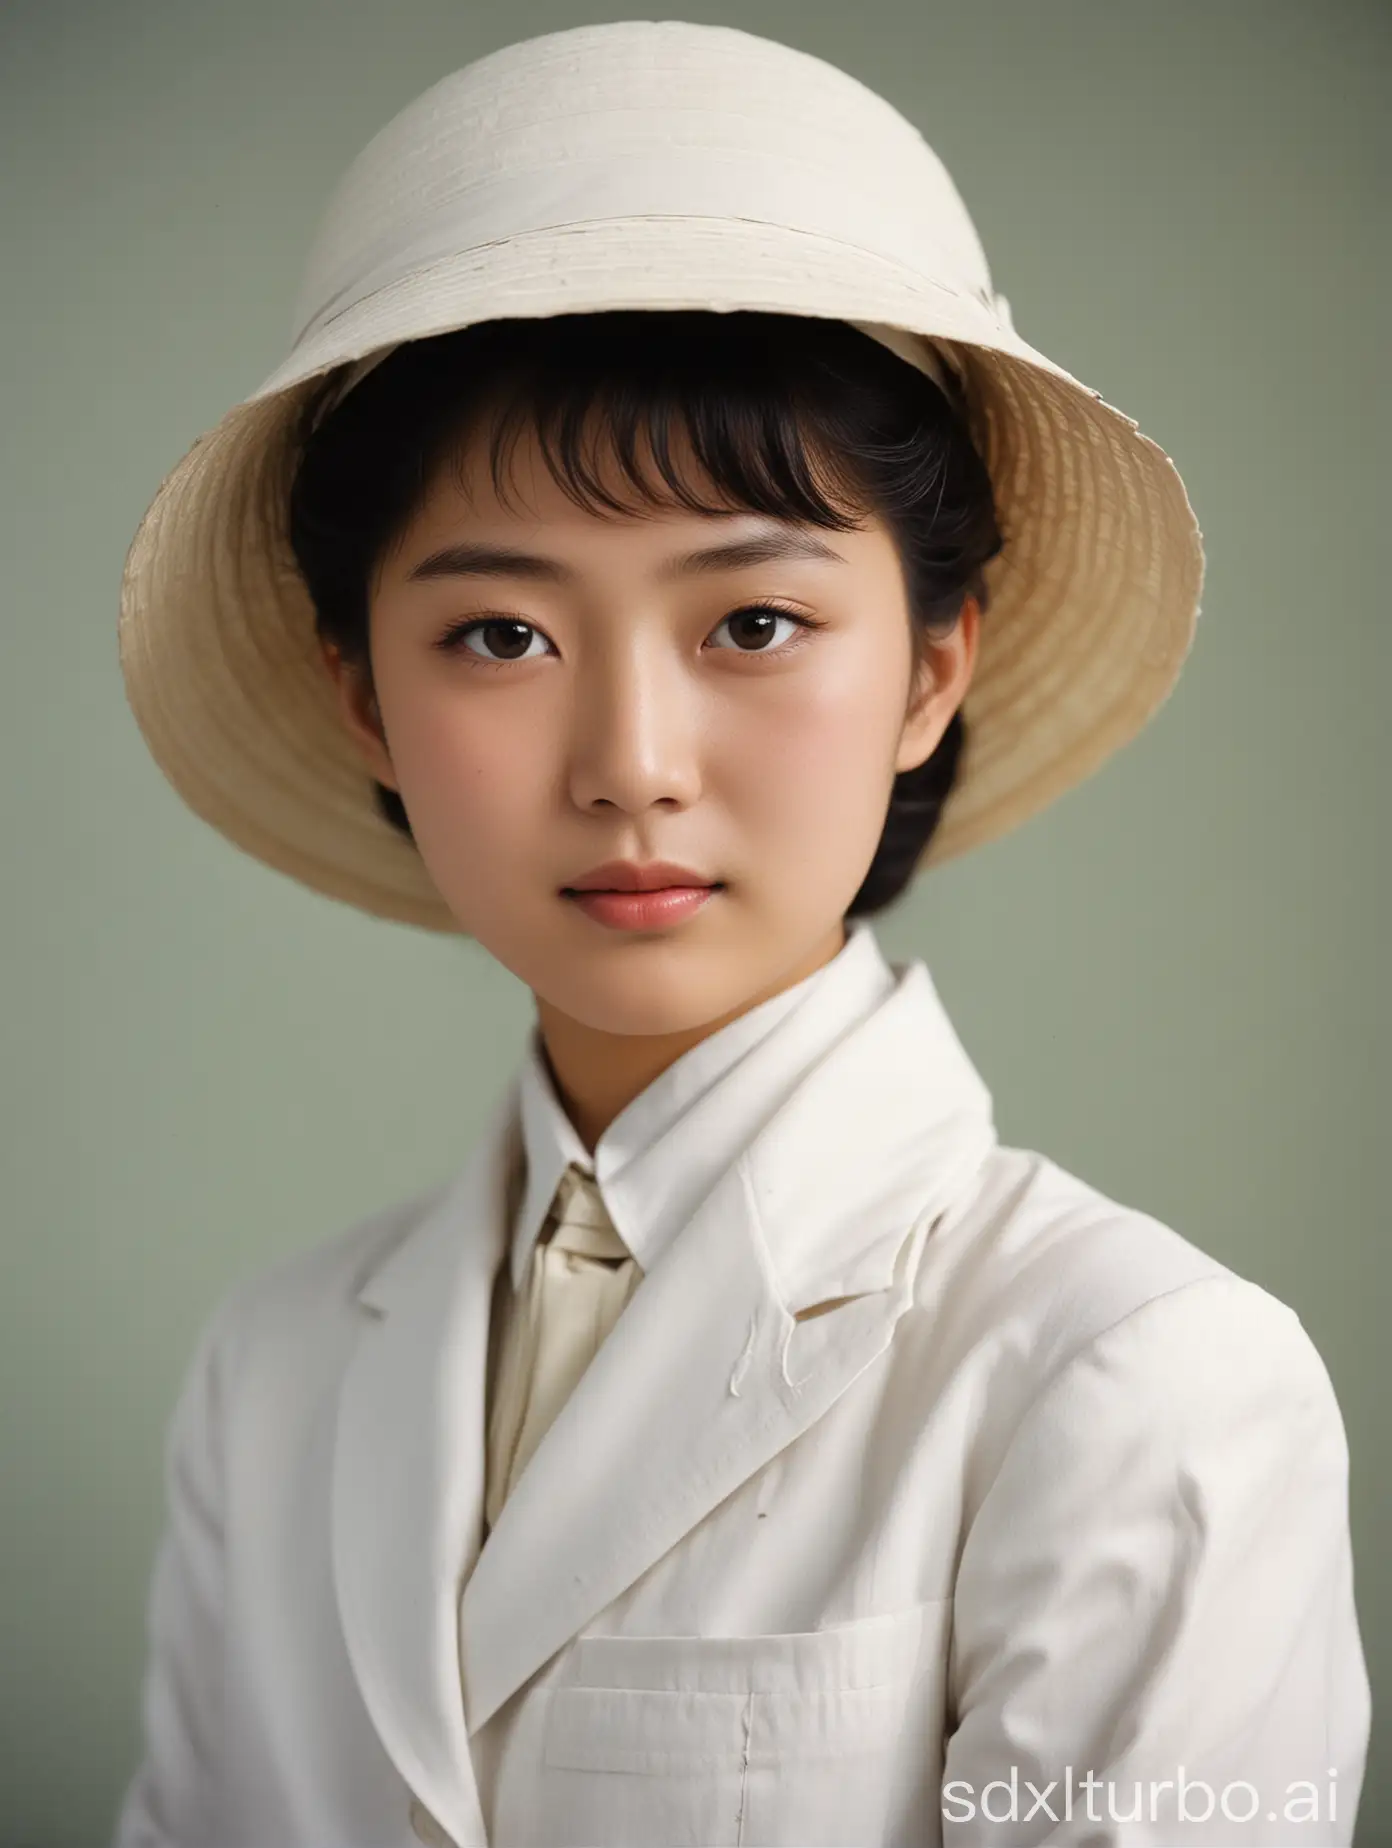 Portrait-of-a-19YearOld-Japanese-Woman-in-White-Suit-and-Pith-Helmet-1955-Style